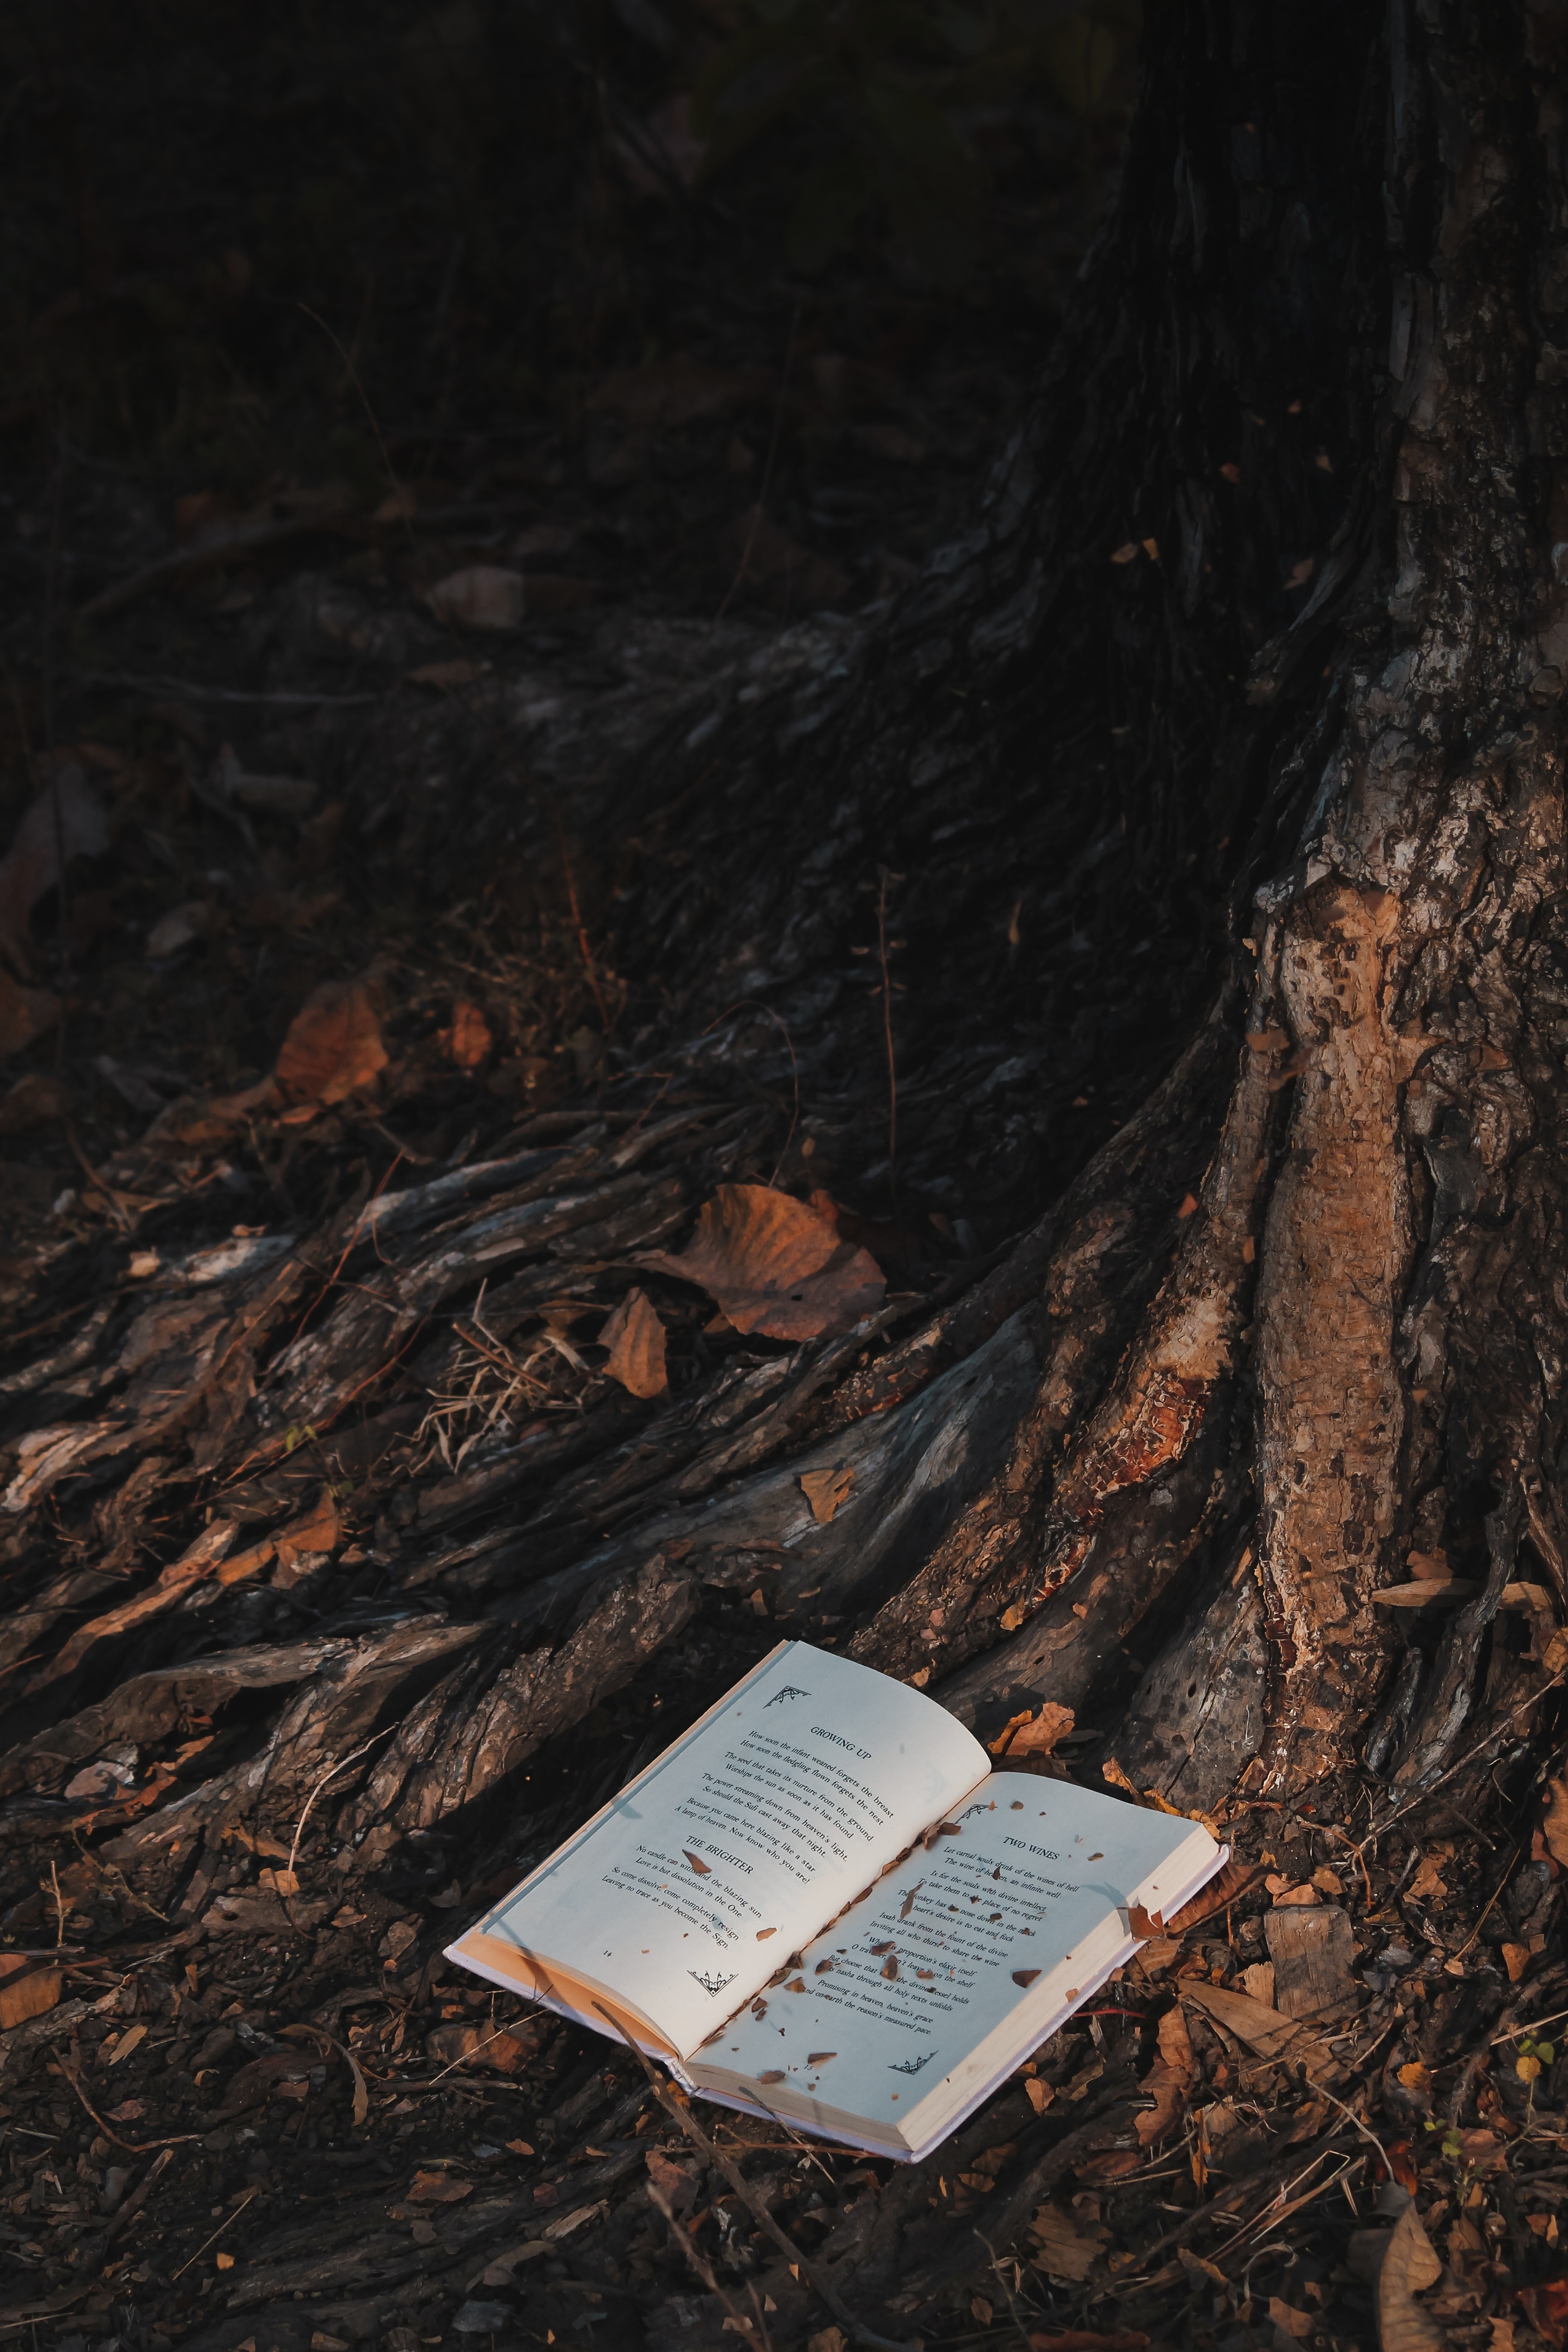 miscellanea, wood, forest, book, miscellaneous, tree